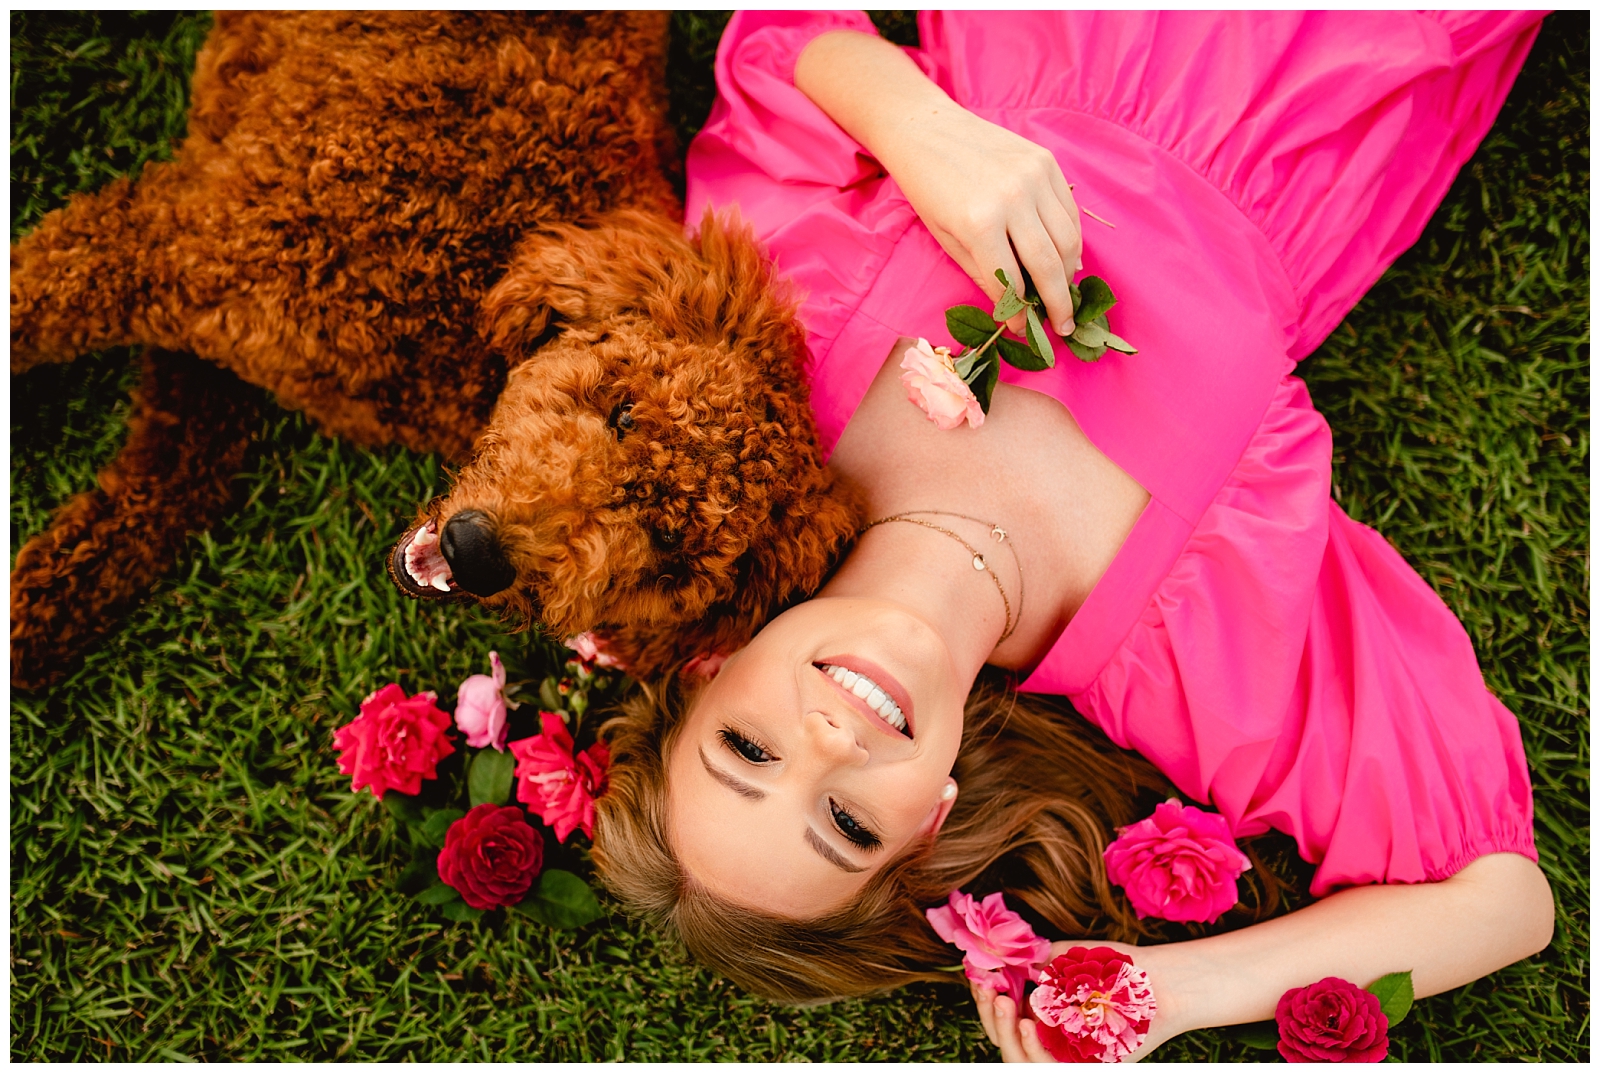 Senior Pictures in Thomasville, Georgia at the Rose Garden during sunset with hot pink dress and Golden Doodle Dog.